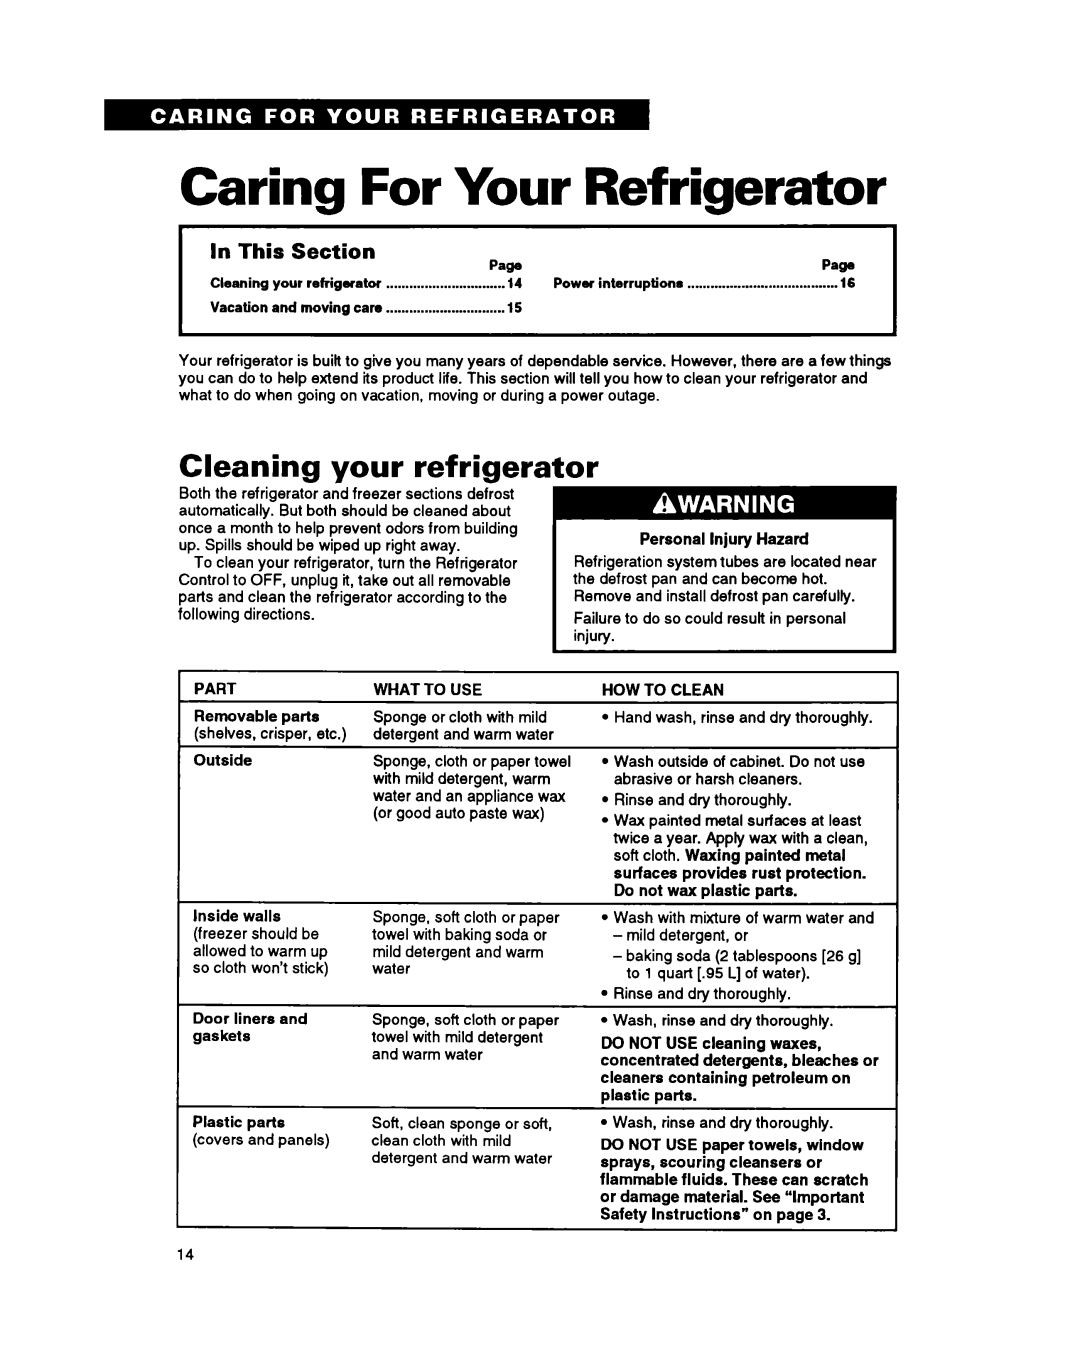 Whirlpool ETl8YK warranty Caring For Your Refrigerator, your, refrigerator, Cleaning, In This Section PagePaw 